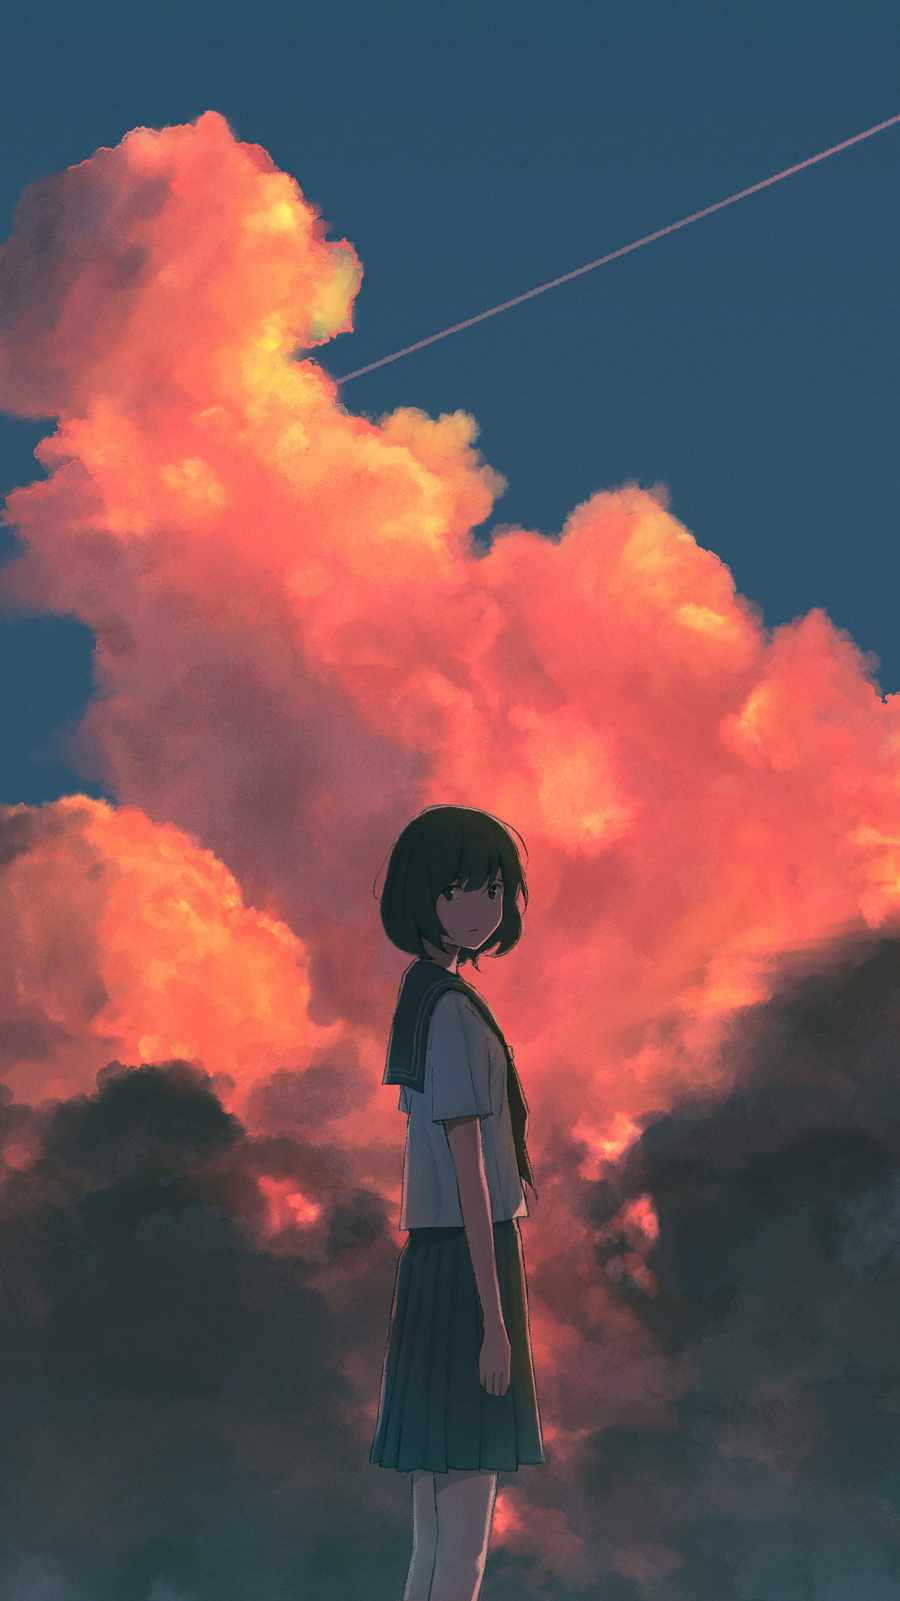 Cloudy Sky and Girl iPhone Wallpaper HD